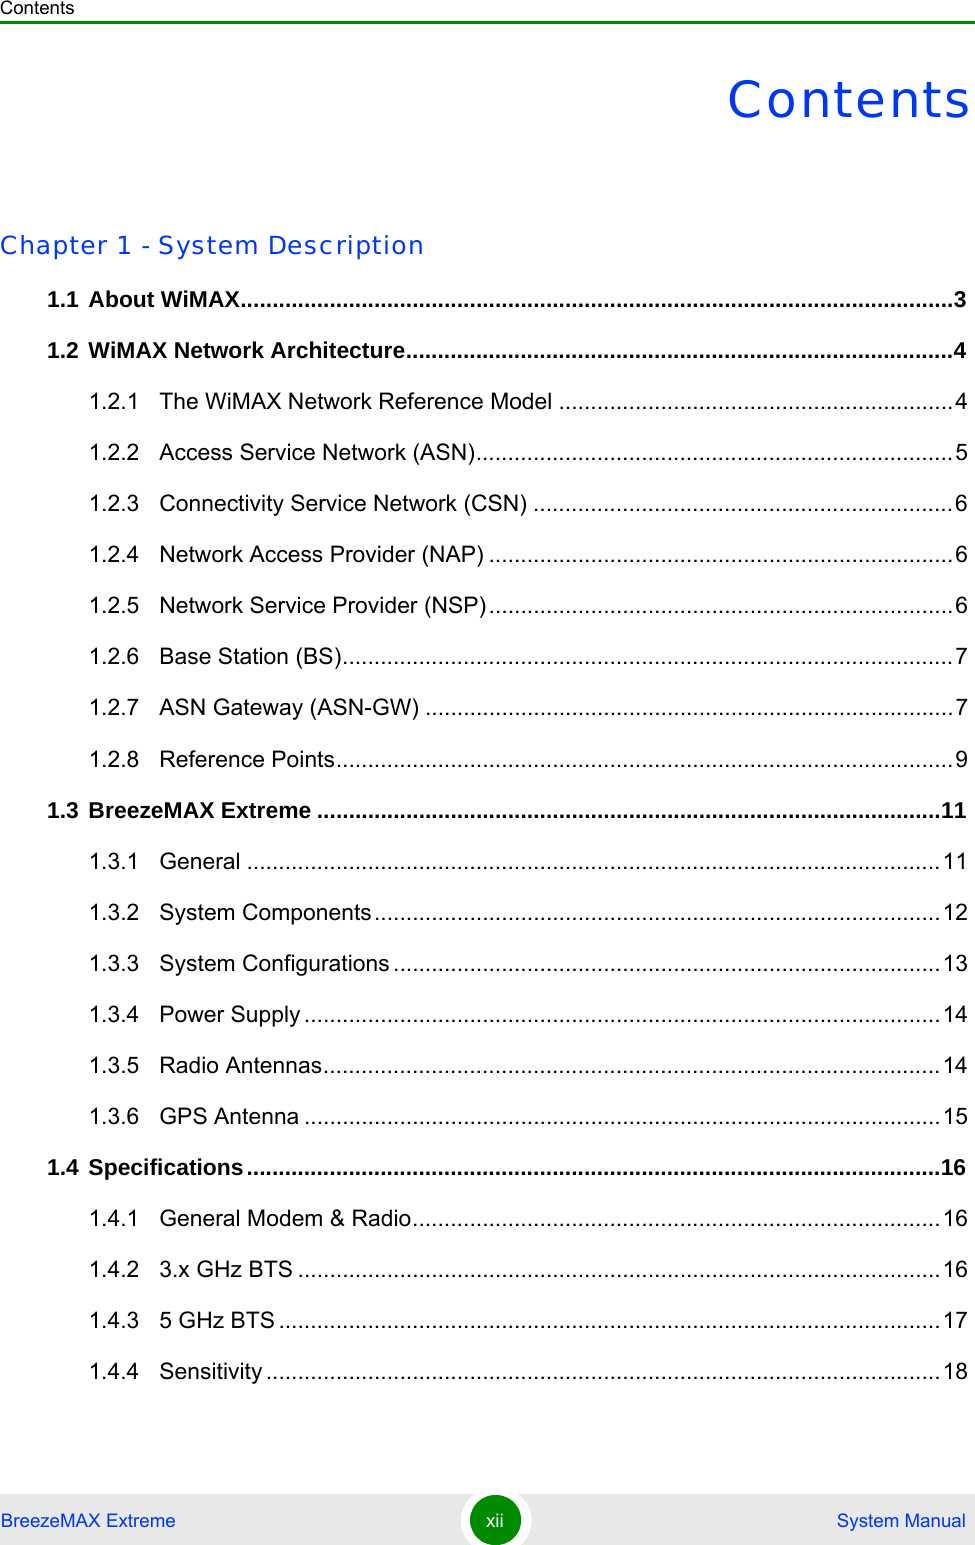 ContentsBreezeMAX Extreme xii  System ManualContentsChapter 1 - System Description1.1 About WiMAX................................................................................................................31.2 WiMAX Network Architecture......................................................................................41.2.1 The WiMAX Network Reference Model ..............................................................41.2.2 Access Service Network (ASN)...........................................................................51.2.3 Connectivity Service Network (CSN) ..................................................................61.2.4 Network Access Provider (NAP) .........................................................................61.2.5 Network Service Provider (NSP).........................................................................61.2.6 Base Station (BS)................................................................................................71.2.7 ASN Gateway (ASN-GW) ...................................................................................71.2.8 Reference Points.................................................................................................91.3 BreezeMAX Extreme ..................................................................................................111.3.1 General .............................................................................................................111.3.2 System Components.........................................................................................121.3.3 System Configurations ......................................................................................131.3.4 Power Supply ....................................................................................................141.3.5 Radio Antennas.................................................................................................141.3.6 GPS Antenna ....................................................................................................151.4 Specifications.............................................................................................................161.4.1 General Modem &amp; Radio...................................................................................161.4.2 3.x GHz BTS .....................................................................................................161.4.3 5 GHz BTS ........................................................................................................171.4.4 Sensitivity ..........................................................................................................18